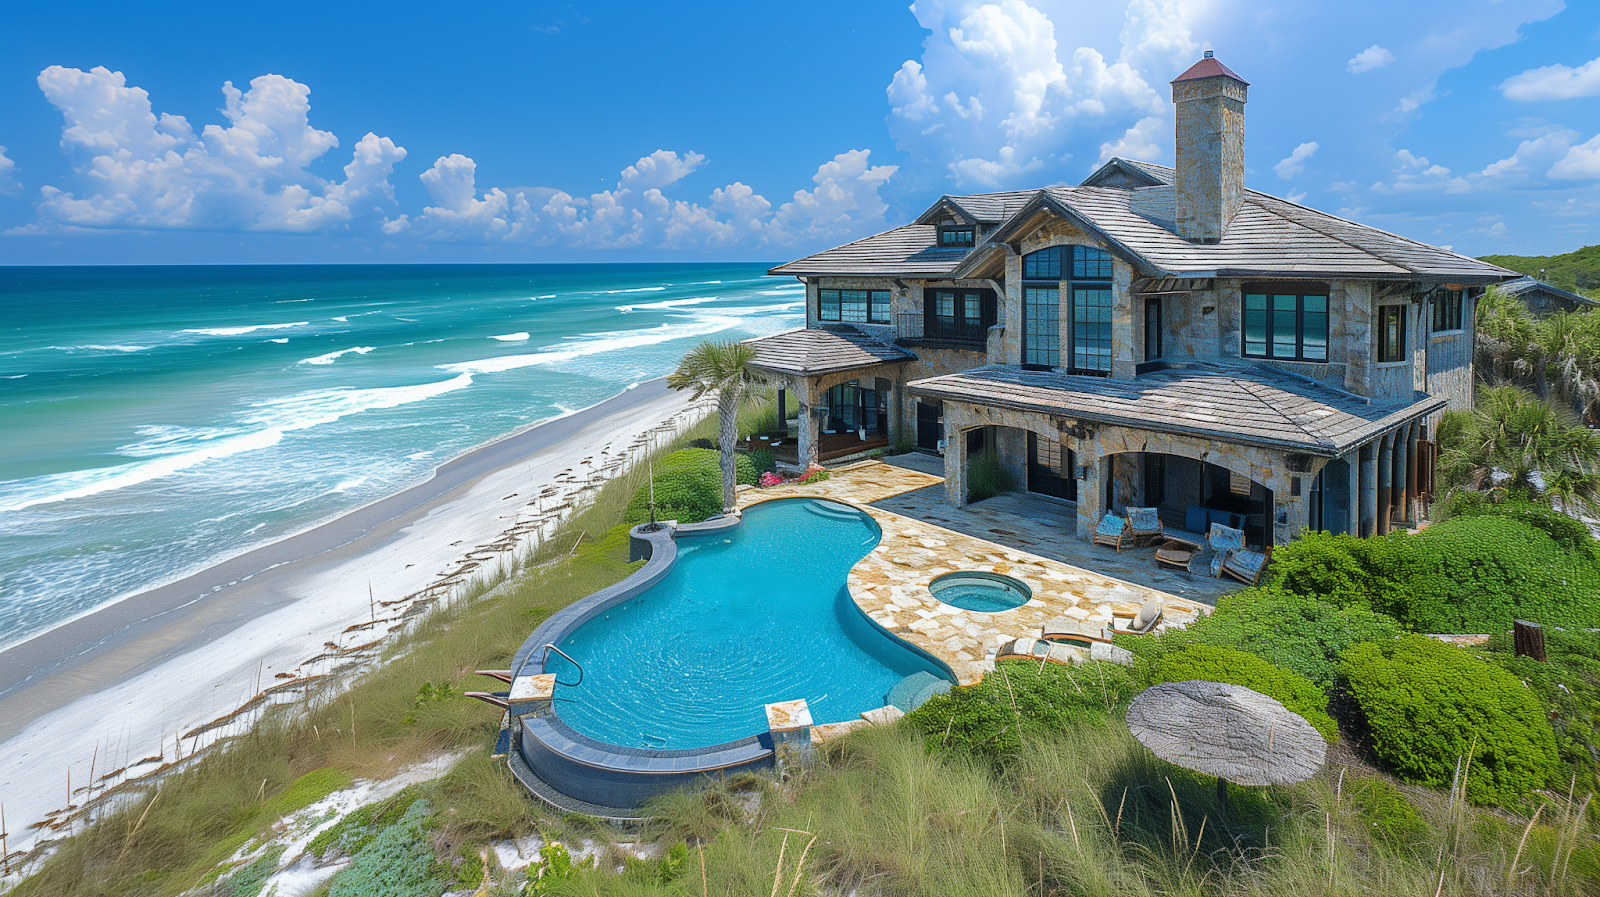 A villa with a beachside view of the ocean